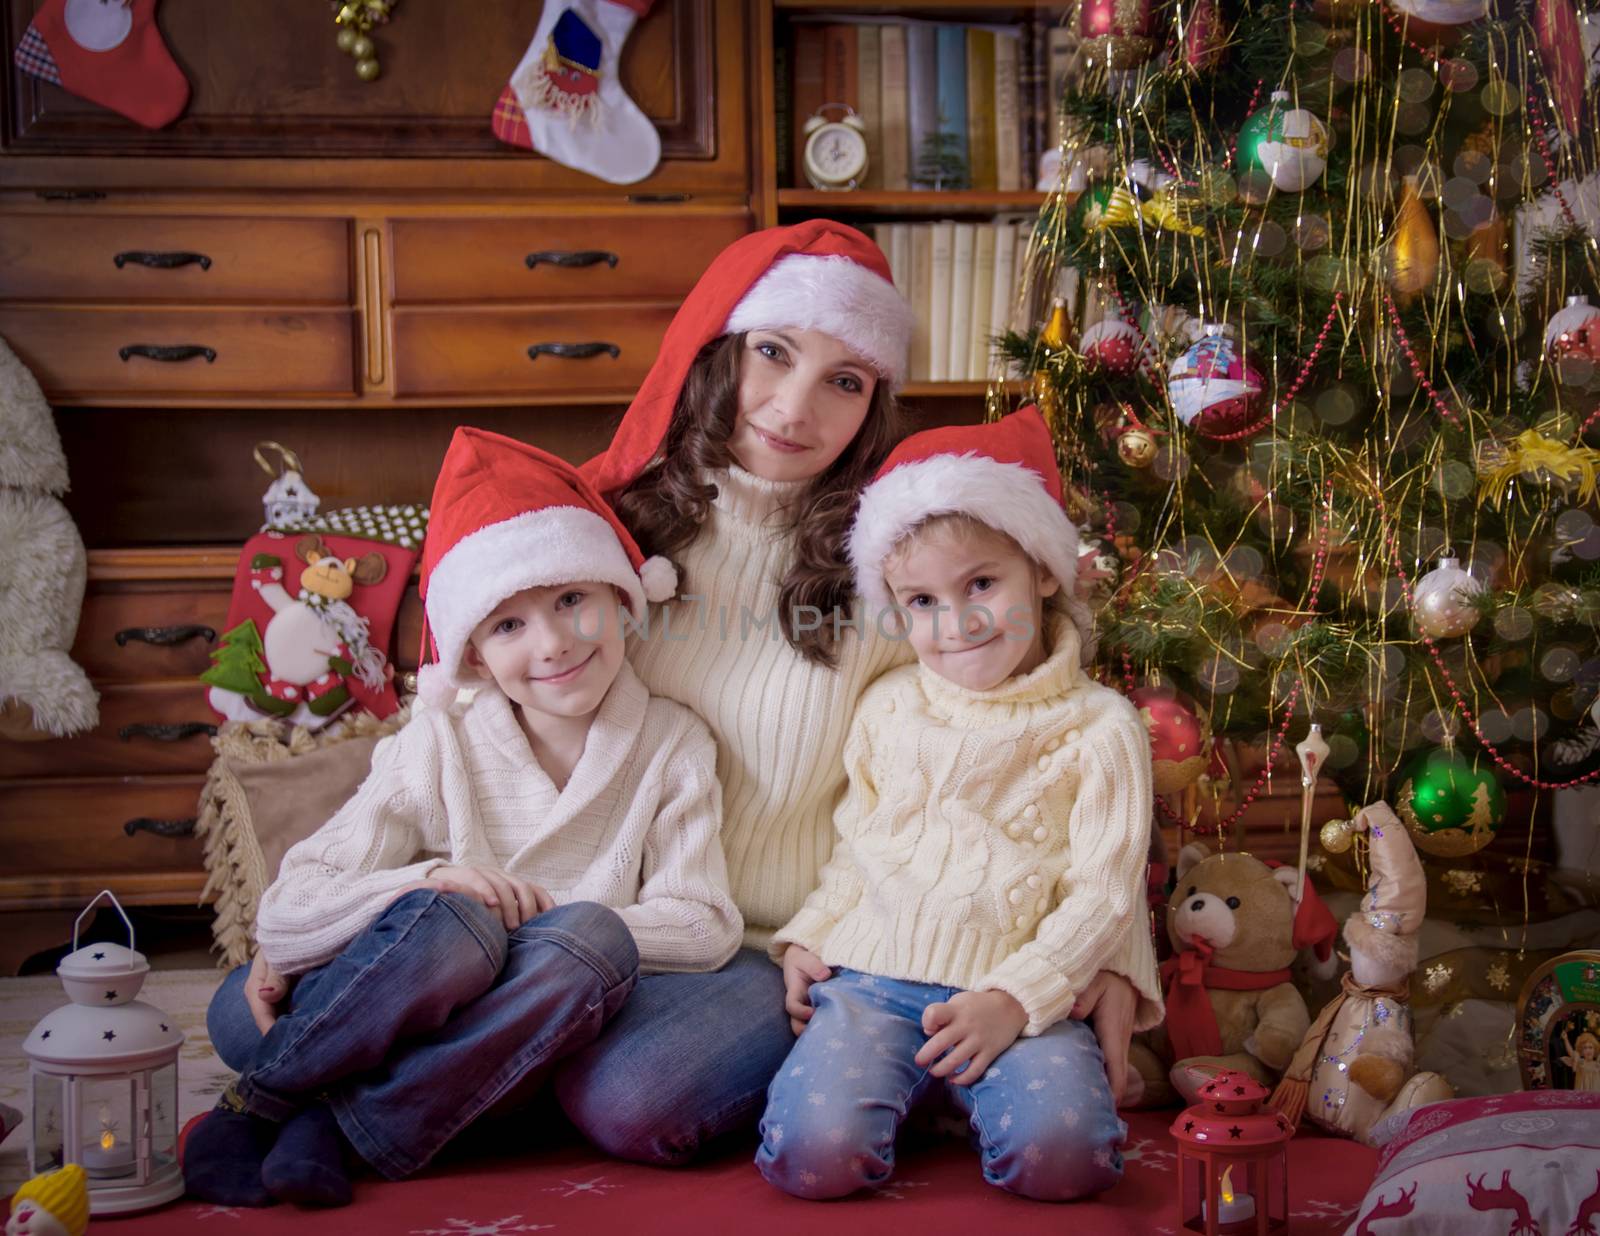 Two children sitting with mother under Christmas tree in hats